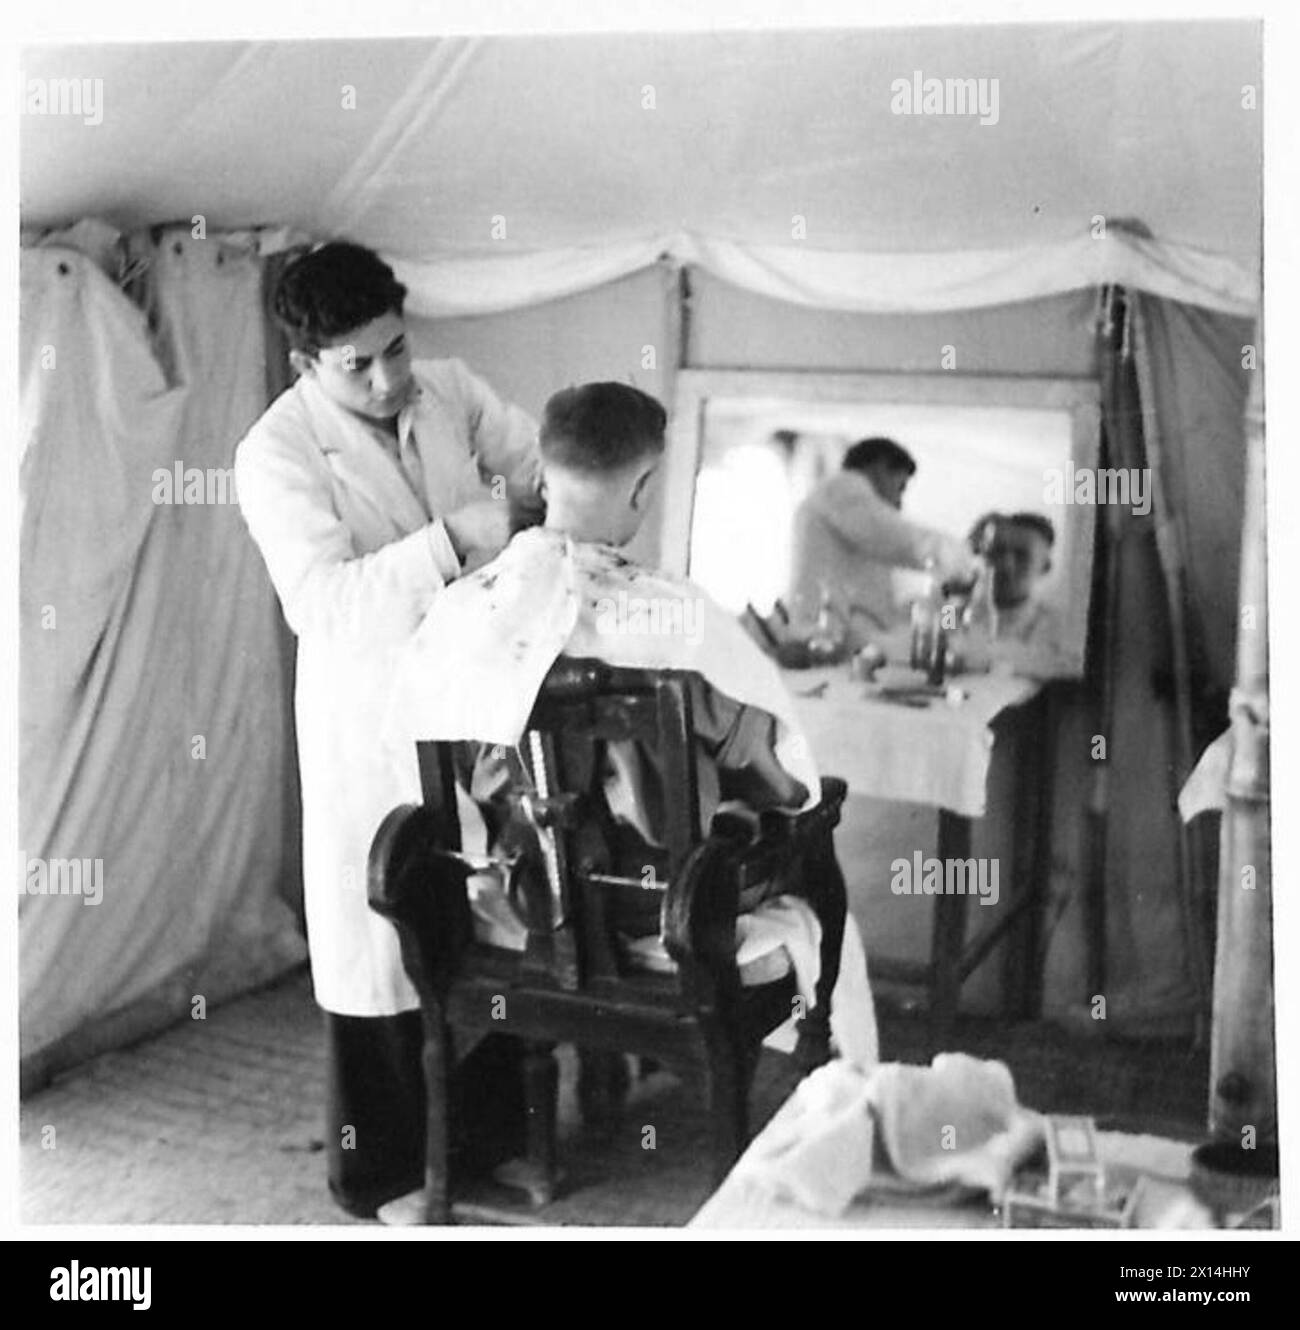 THESE PHOTOGRAPHS WERE TAKEN AT THE REQUEST OF MAJOR RUSTON OF 'PARADE' - A trim-up in the Barber's Shop in the Camp British Army Stock Photo